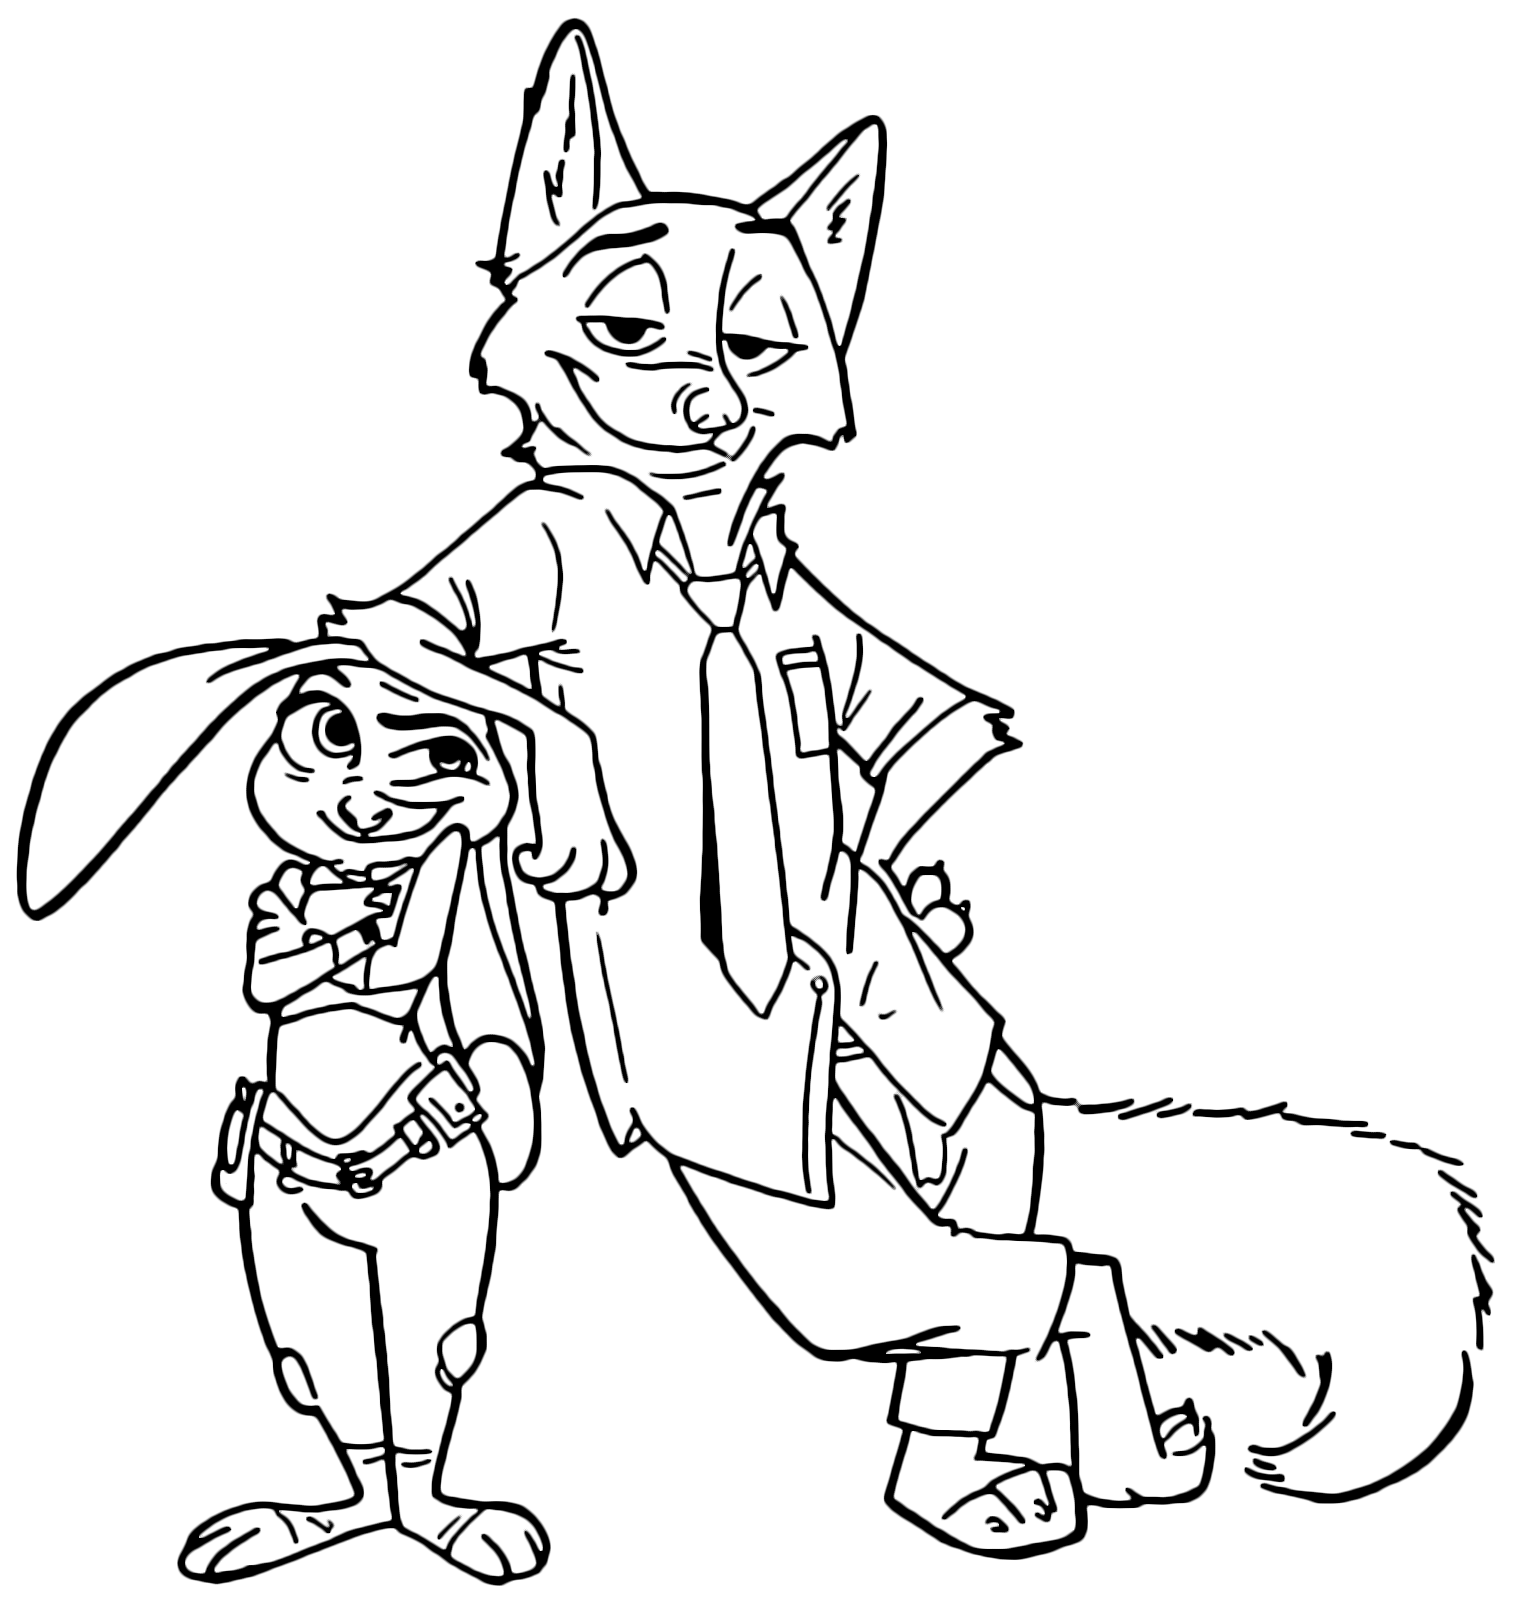 Zootopia - Nick Wilde rests with arm on Judy Hopps head